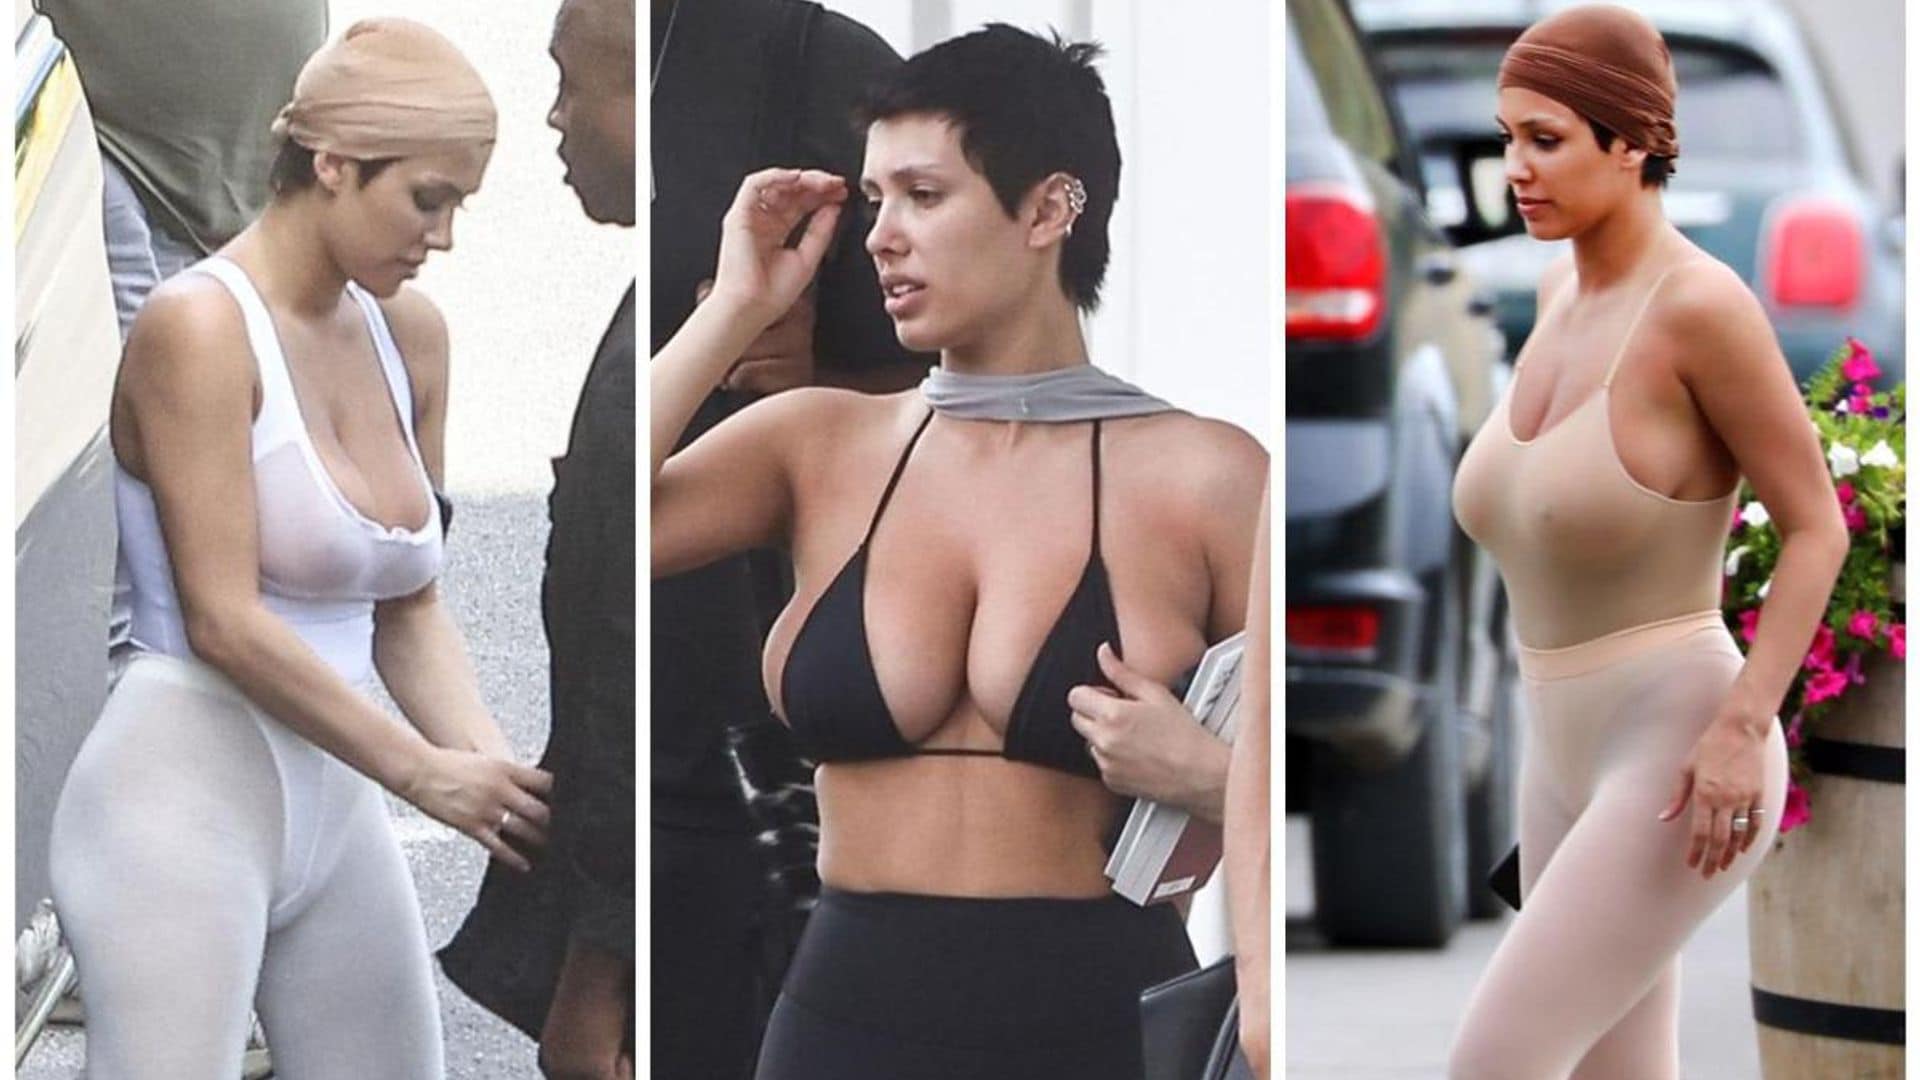 All the Bianca Censori's transparent and suggestive looks that ignited controversy in Italy